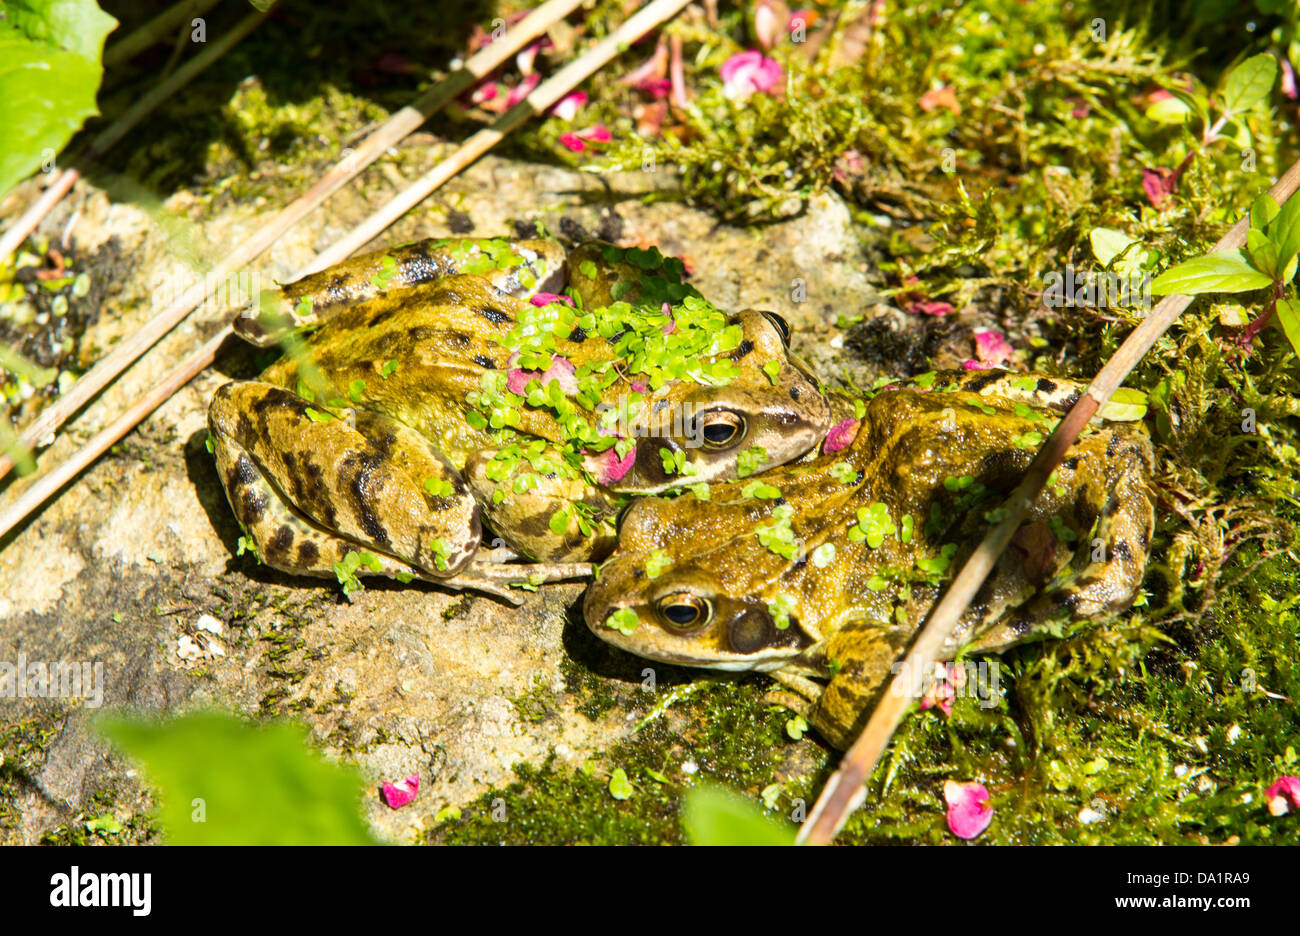 Two frogs covered in duck weed from a garden pond, Ambleside, Cumbria, UK. Stock Photo